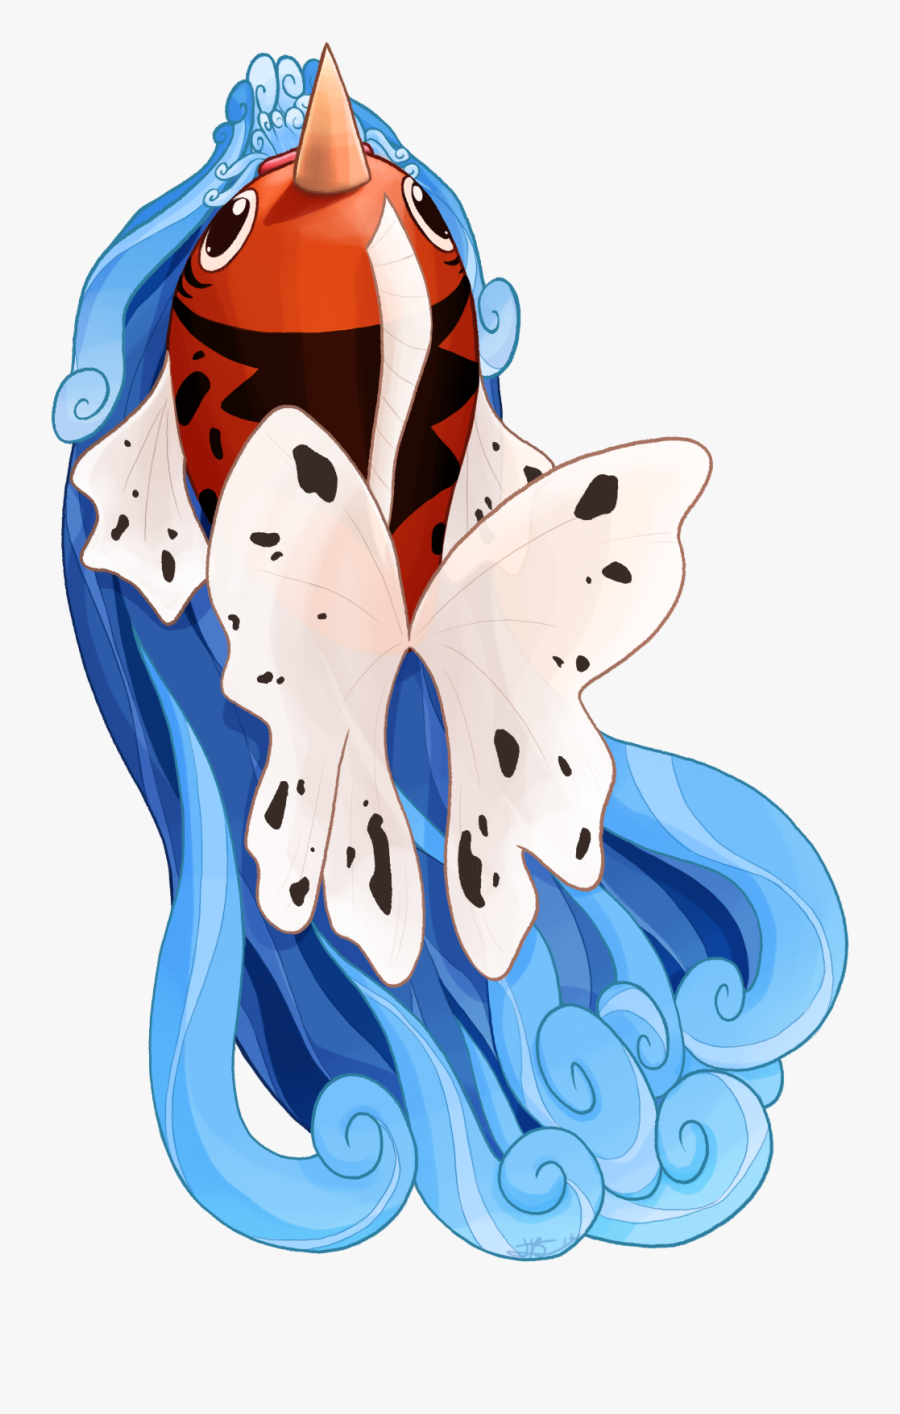 Seaking Used Waterfall By Zoulouluvu - Seaking Pokemon, Transparent Clipart